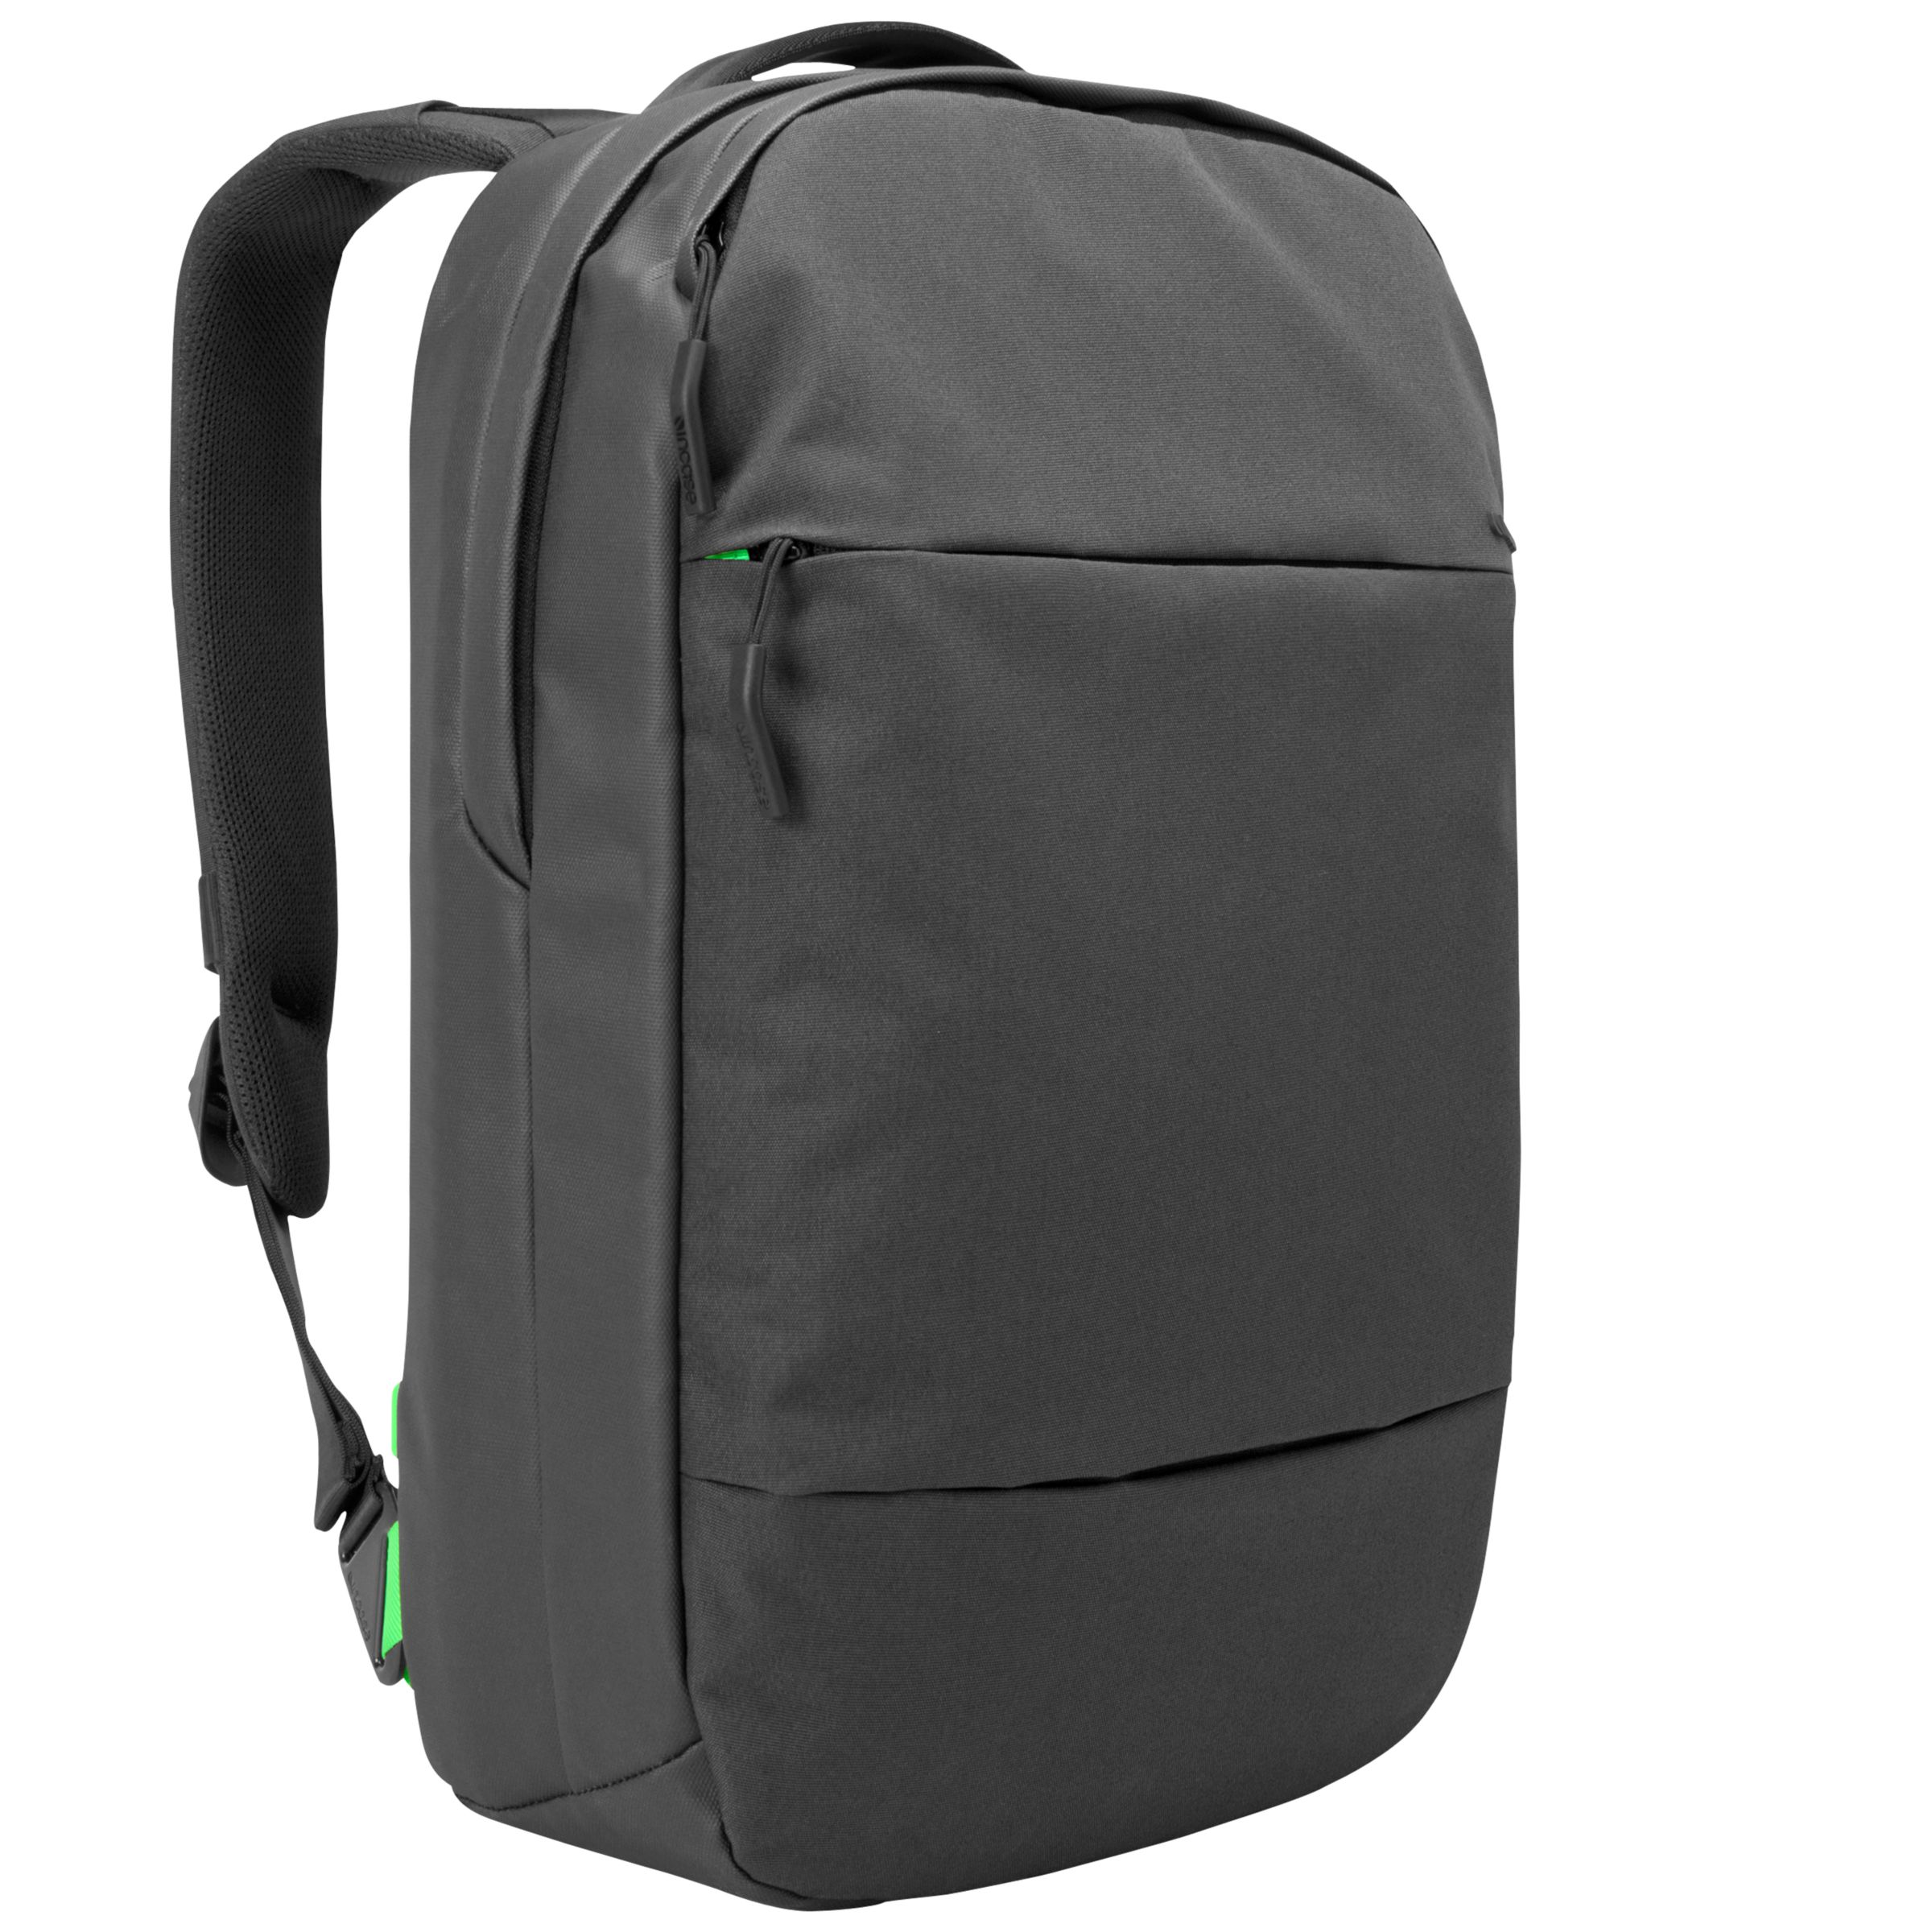 Incase City Compact Backpack for 15" MacBook Pro